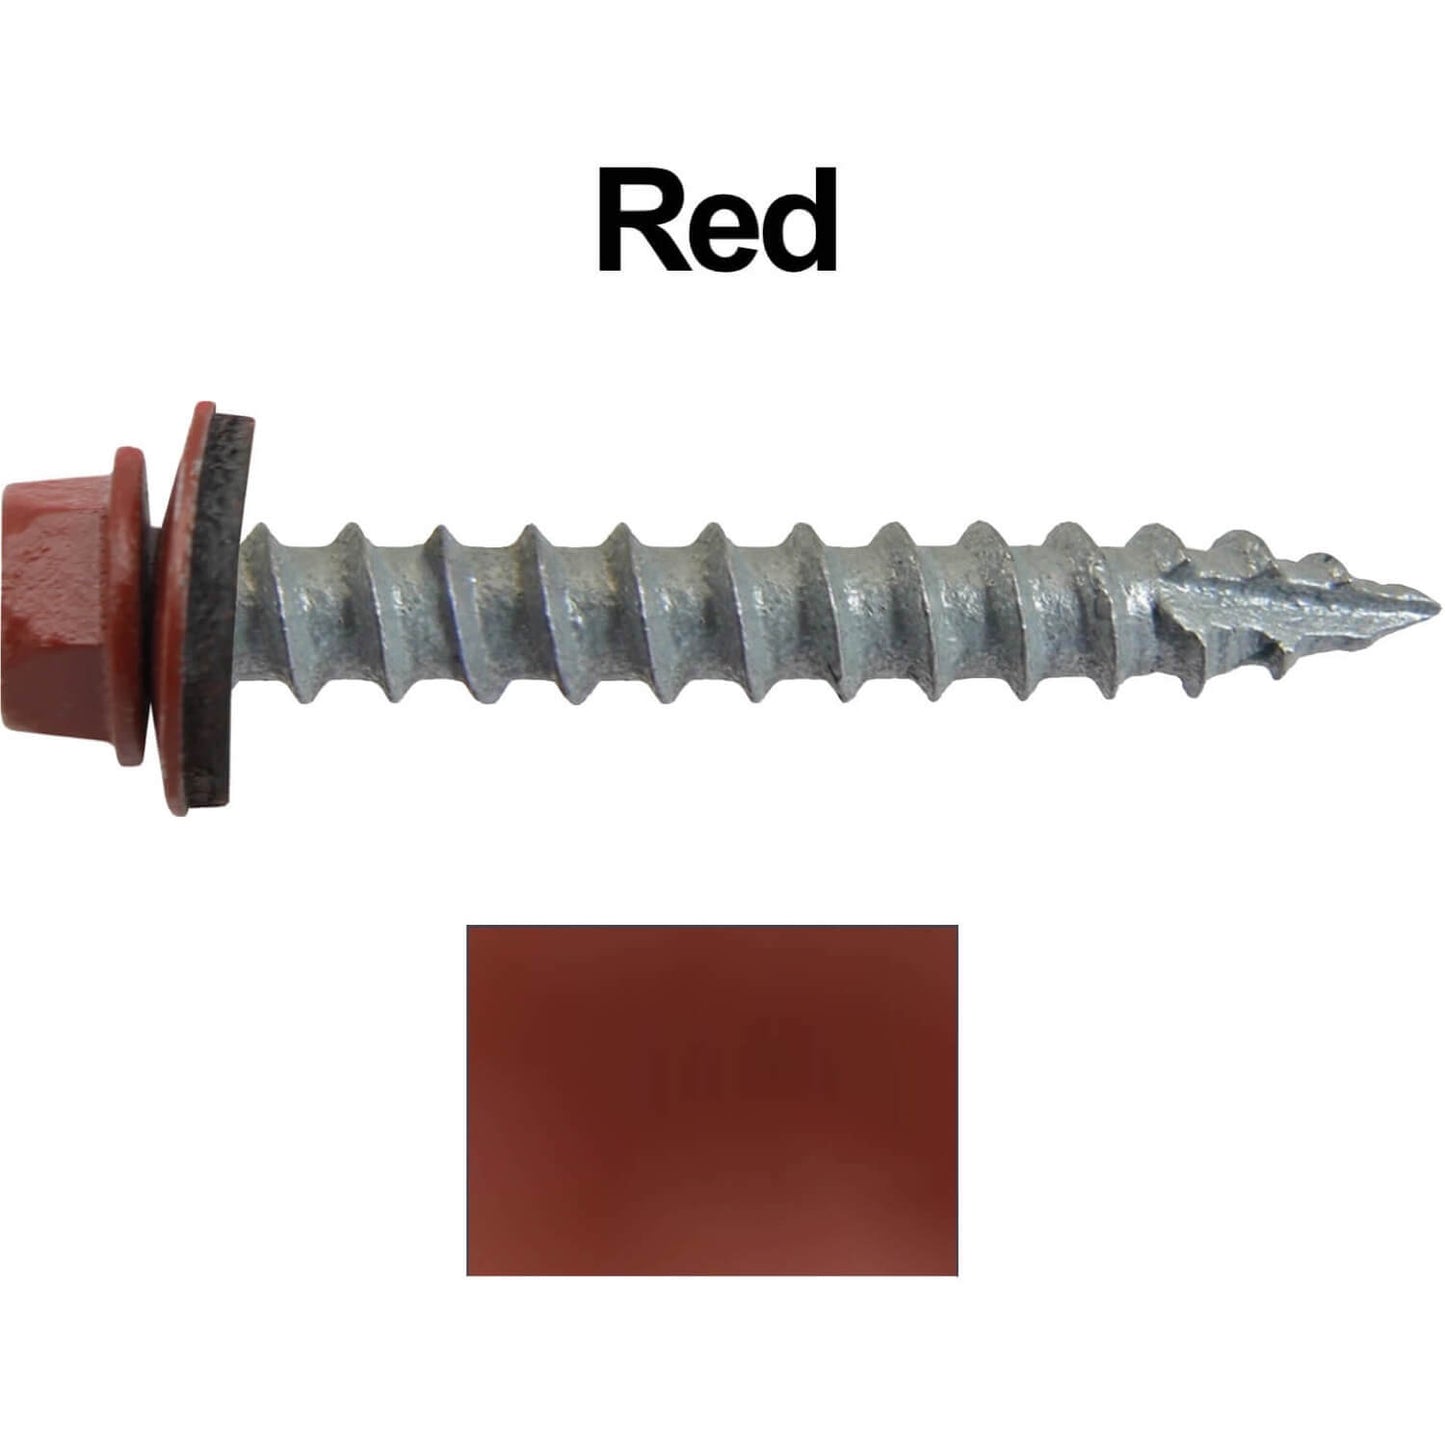 #14 x 1-1/2" Metal ROOFING SCREWS(250) Screws Hex Washer Head Sheet Metal Roof Screw. Self starting/self tapping metal to wood with EPDM washer. Colored head. For corrugated roofing